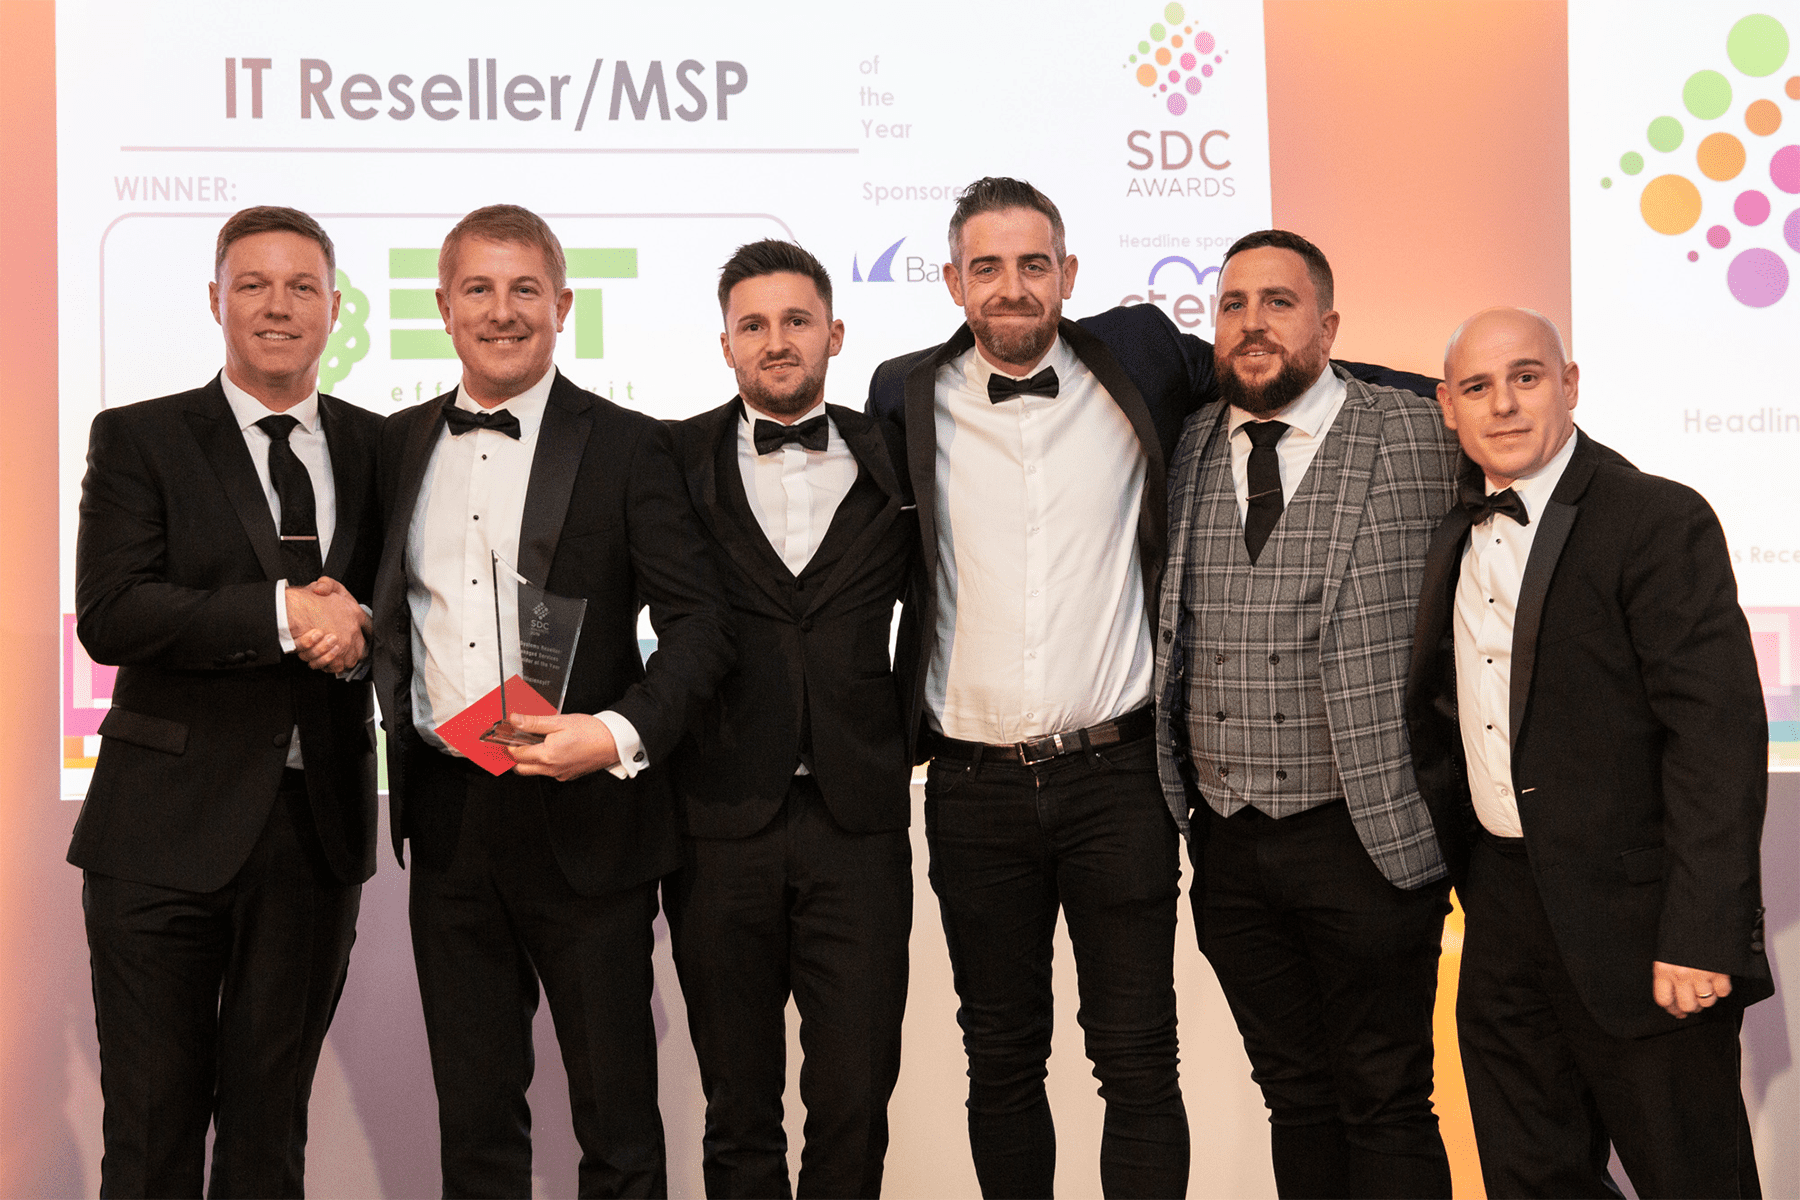 PRESS RELEASE: EfficiencyIT Win ‘IT Systems Reseller of The Year’ at SDC Awards 2019